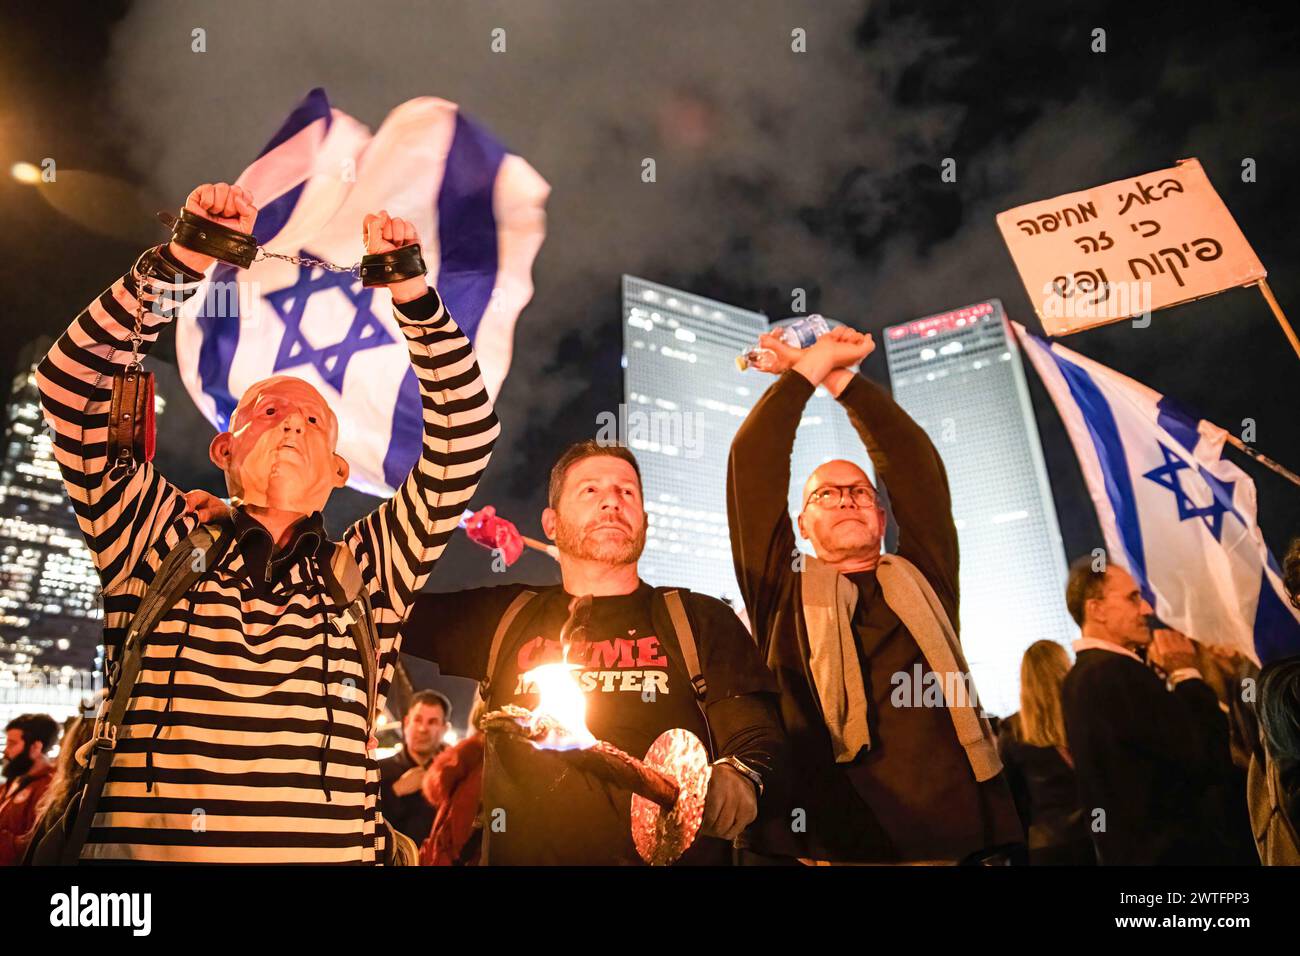 A protester dressed in a convict uniform and a Benjamin Netanyahu mask lifts his handcuffed arms in the air during a demonstration. Thousands of Israelis protest in the pouring rain calling for Prime Minister Benjamin Netanyahu's ousting. Stock Photo